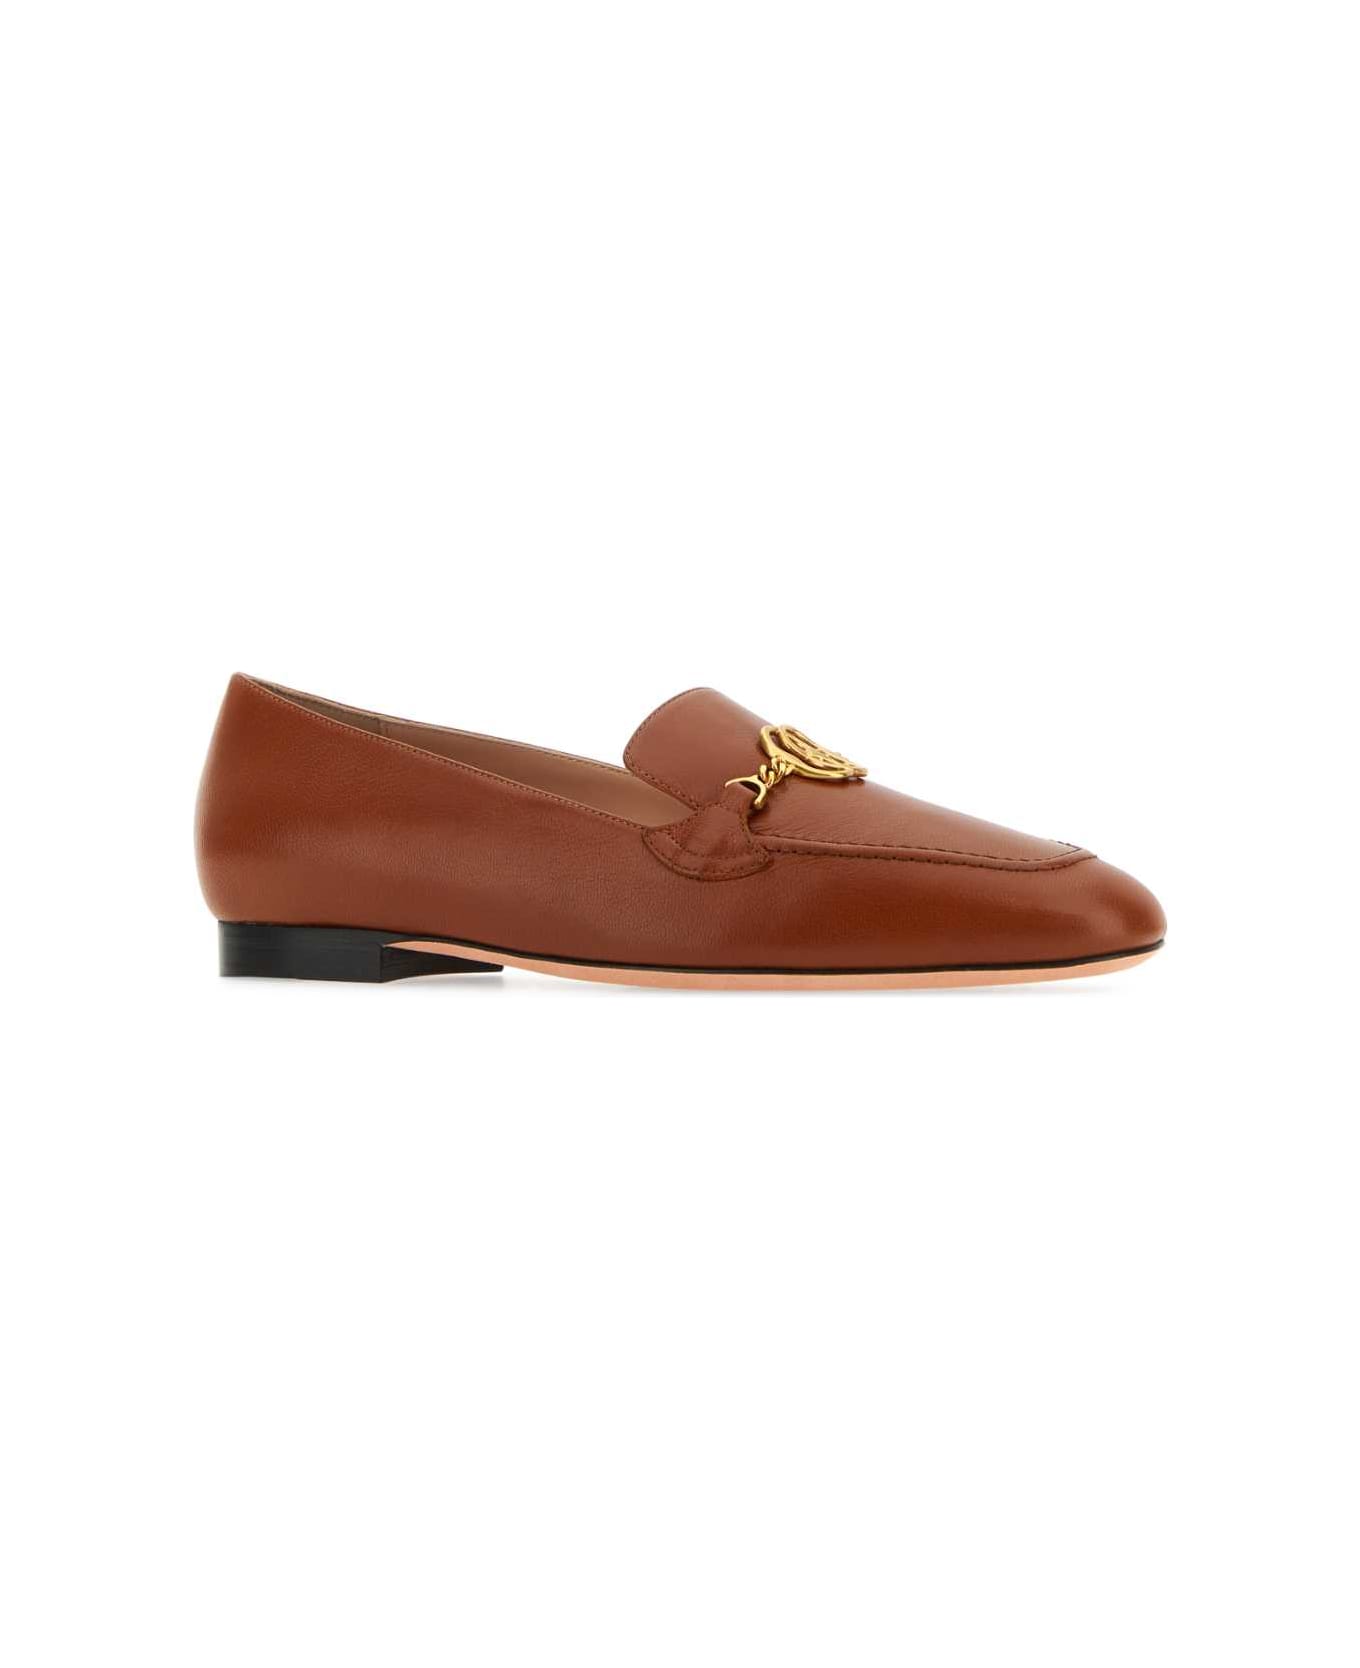 Bally Caramel Leather Obrien Loafers - CUERO50